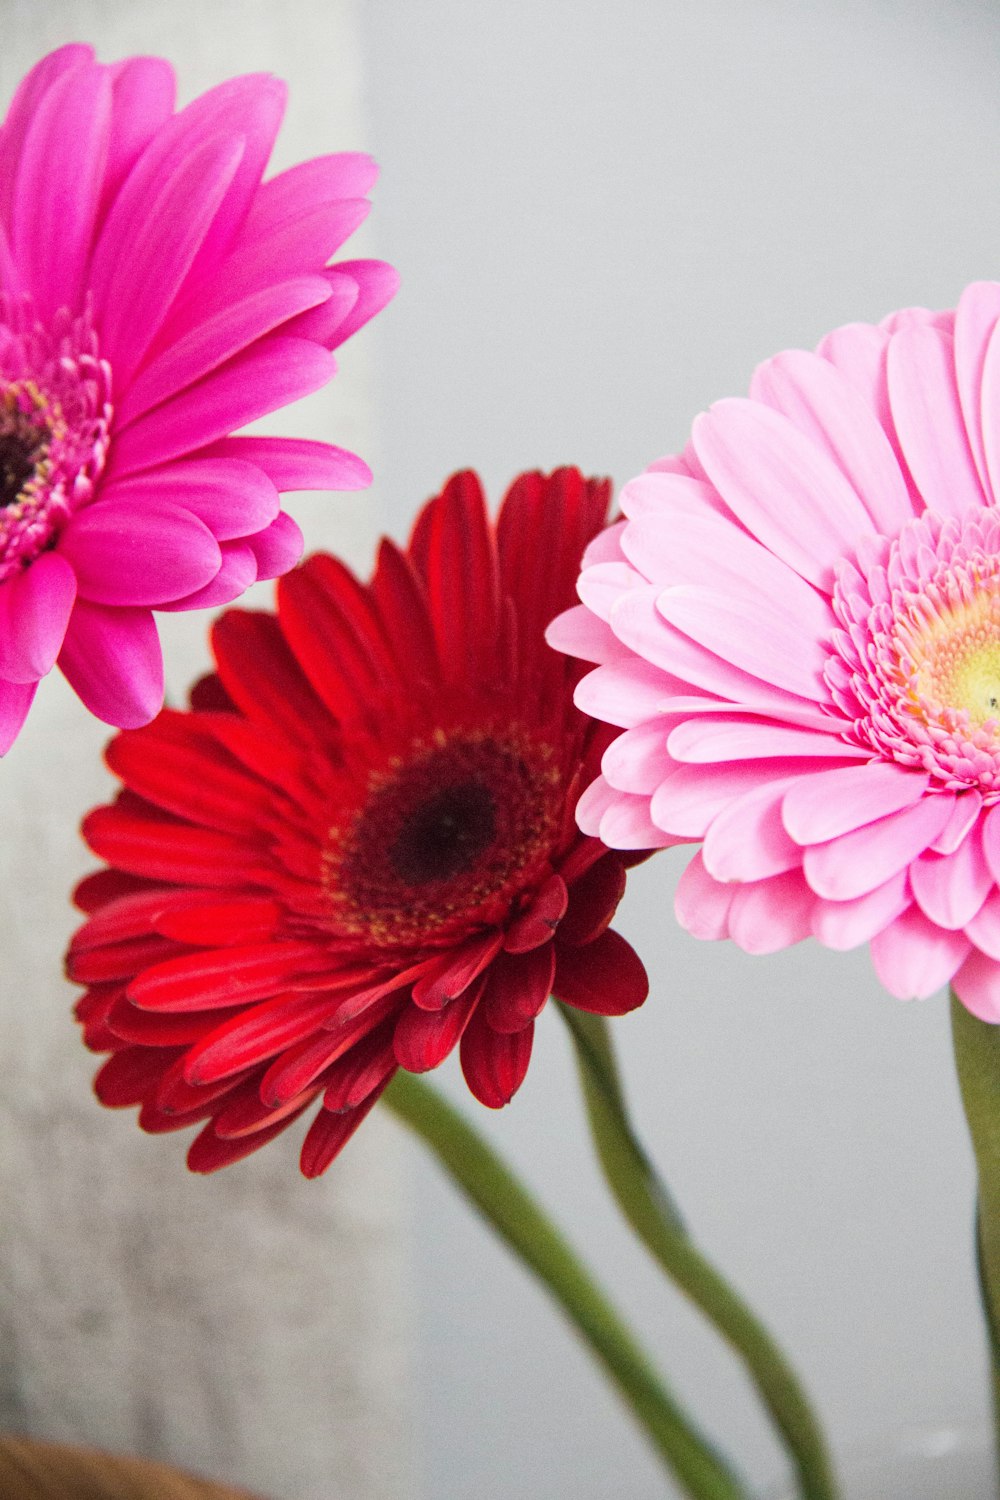 pink gerbera daisy in bloom during daytime